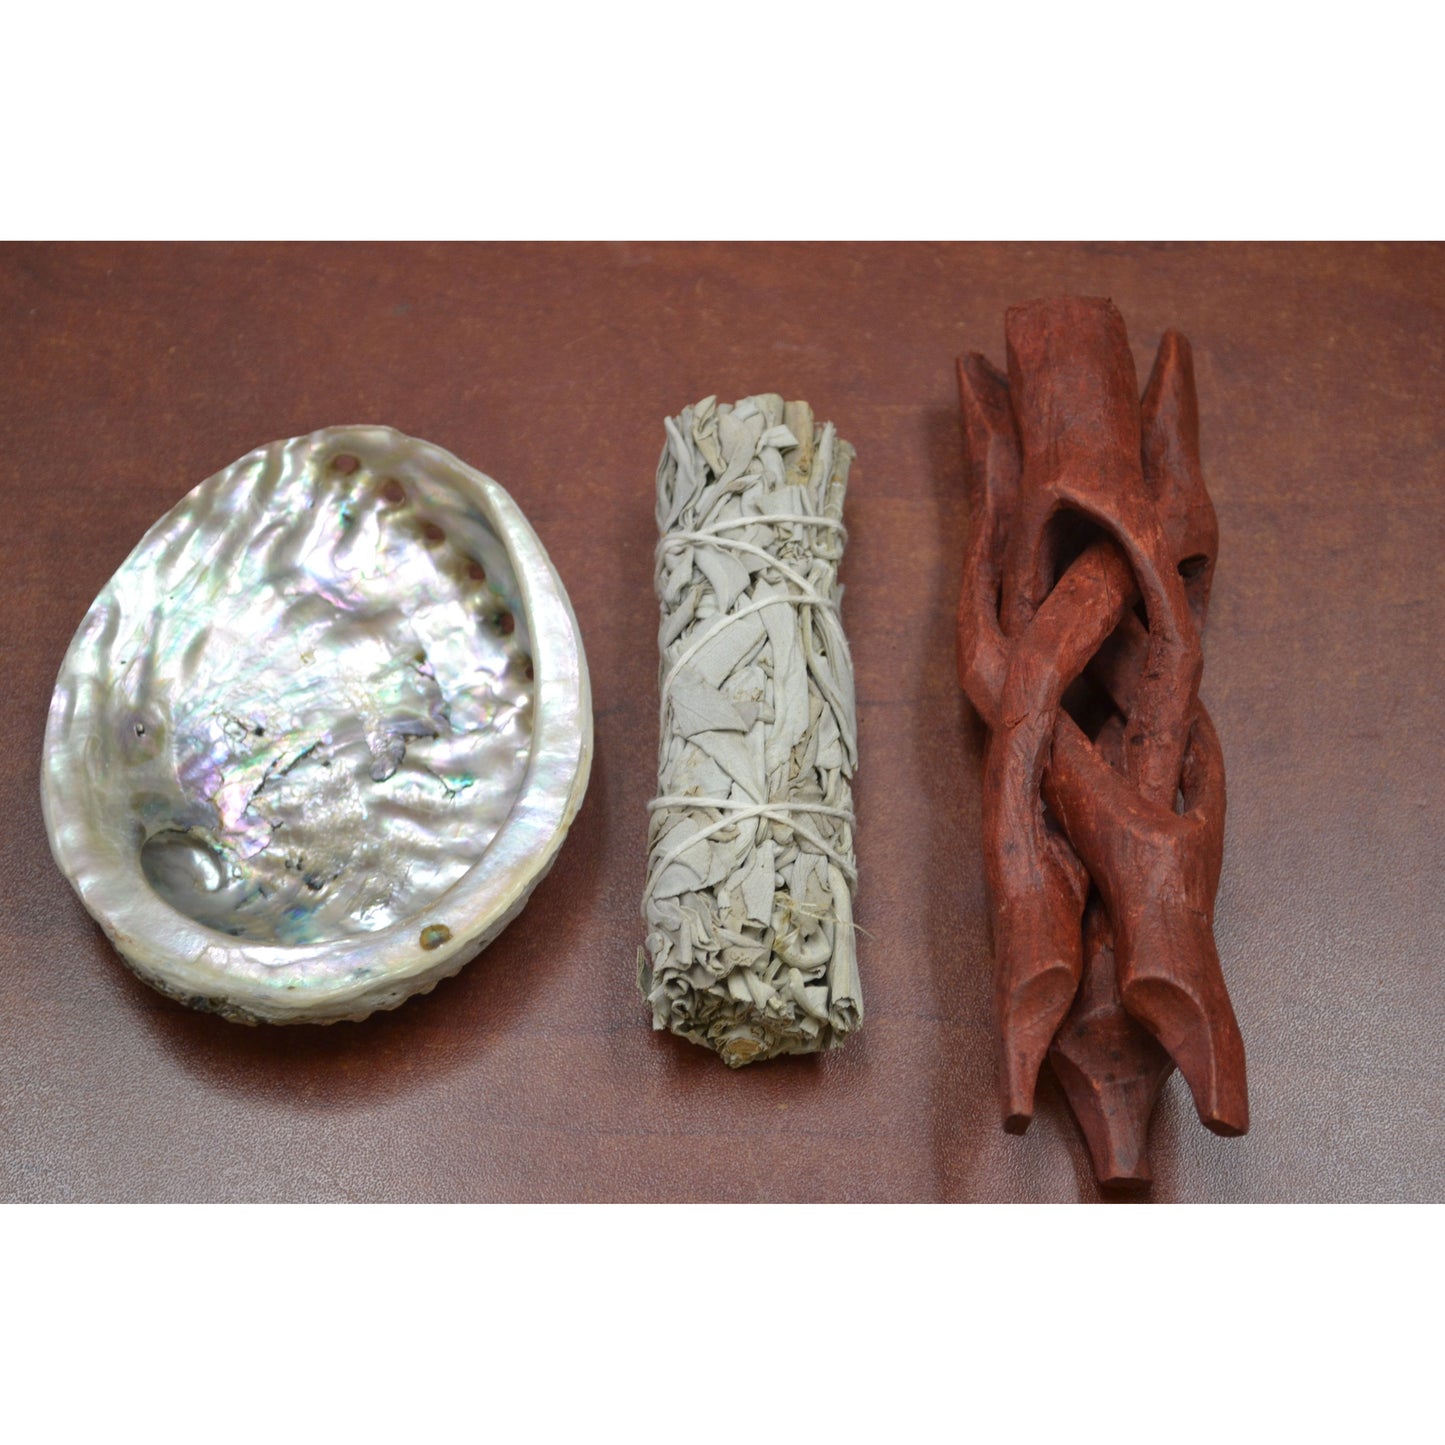 White Sage With Abalone Shell And Wood Stand Smudging Burning Kit